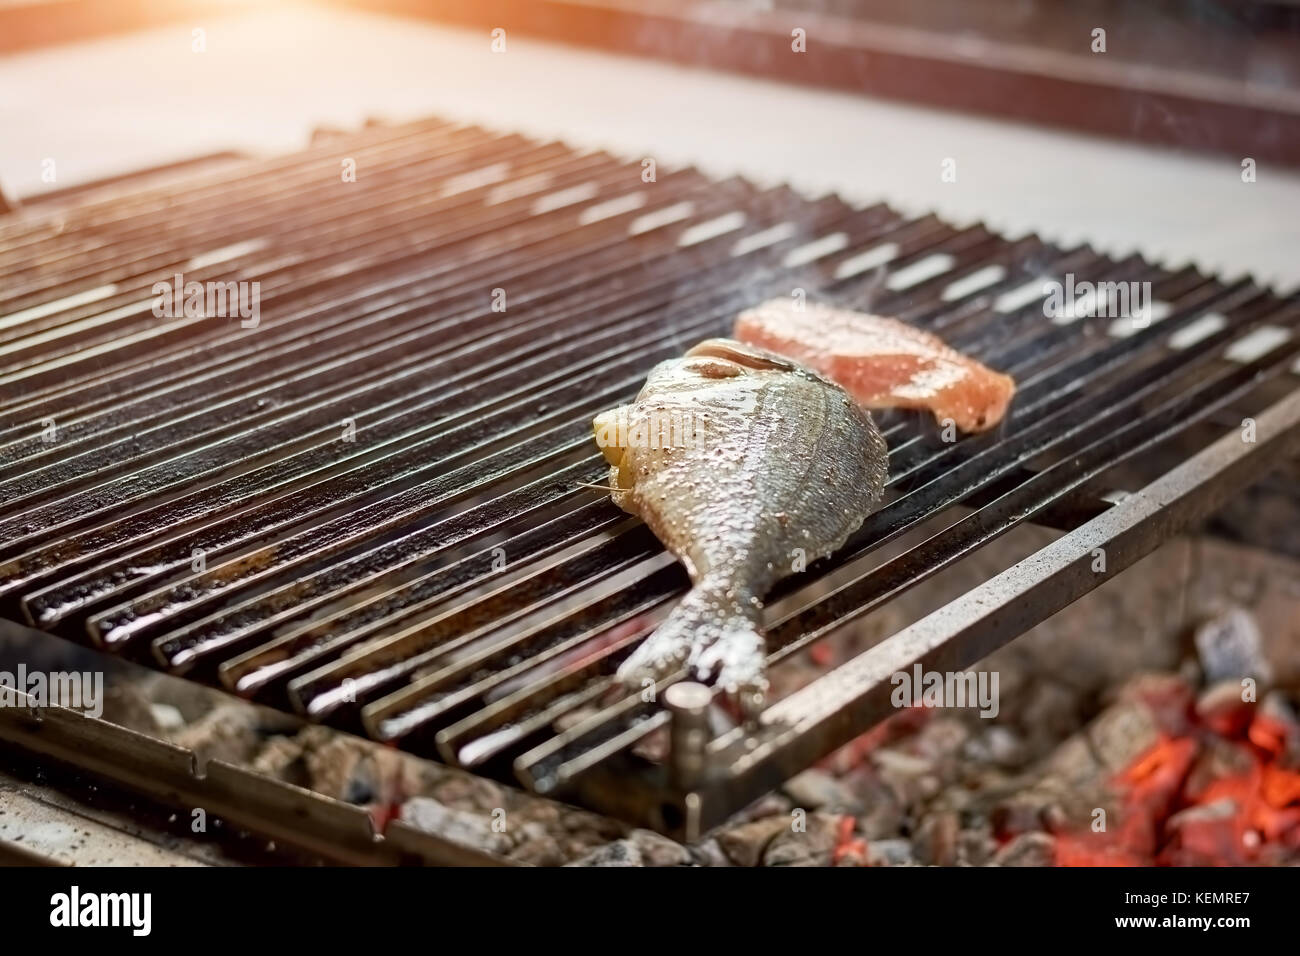 Dorado fish grilling on barbecue grill. Raw fish with spices and lemon on the grill close up. Stock Photo